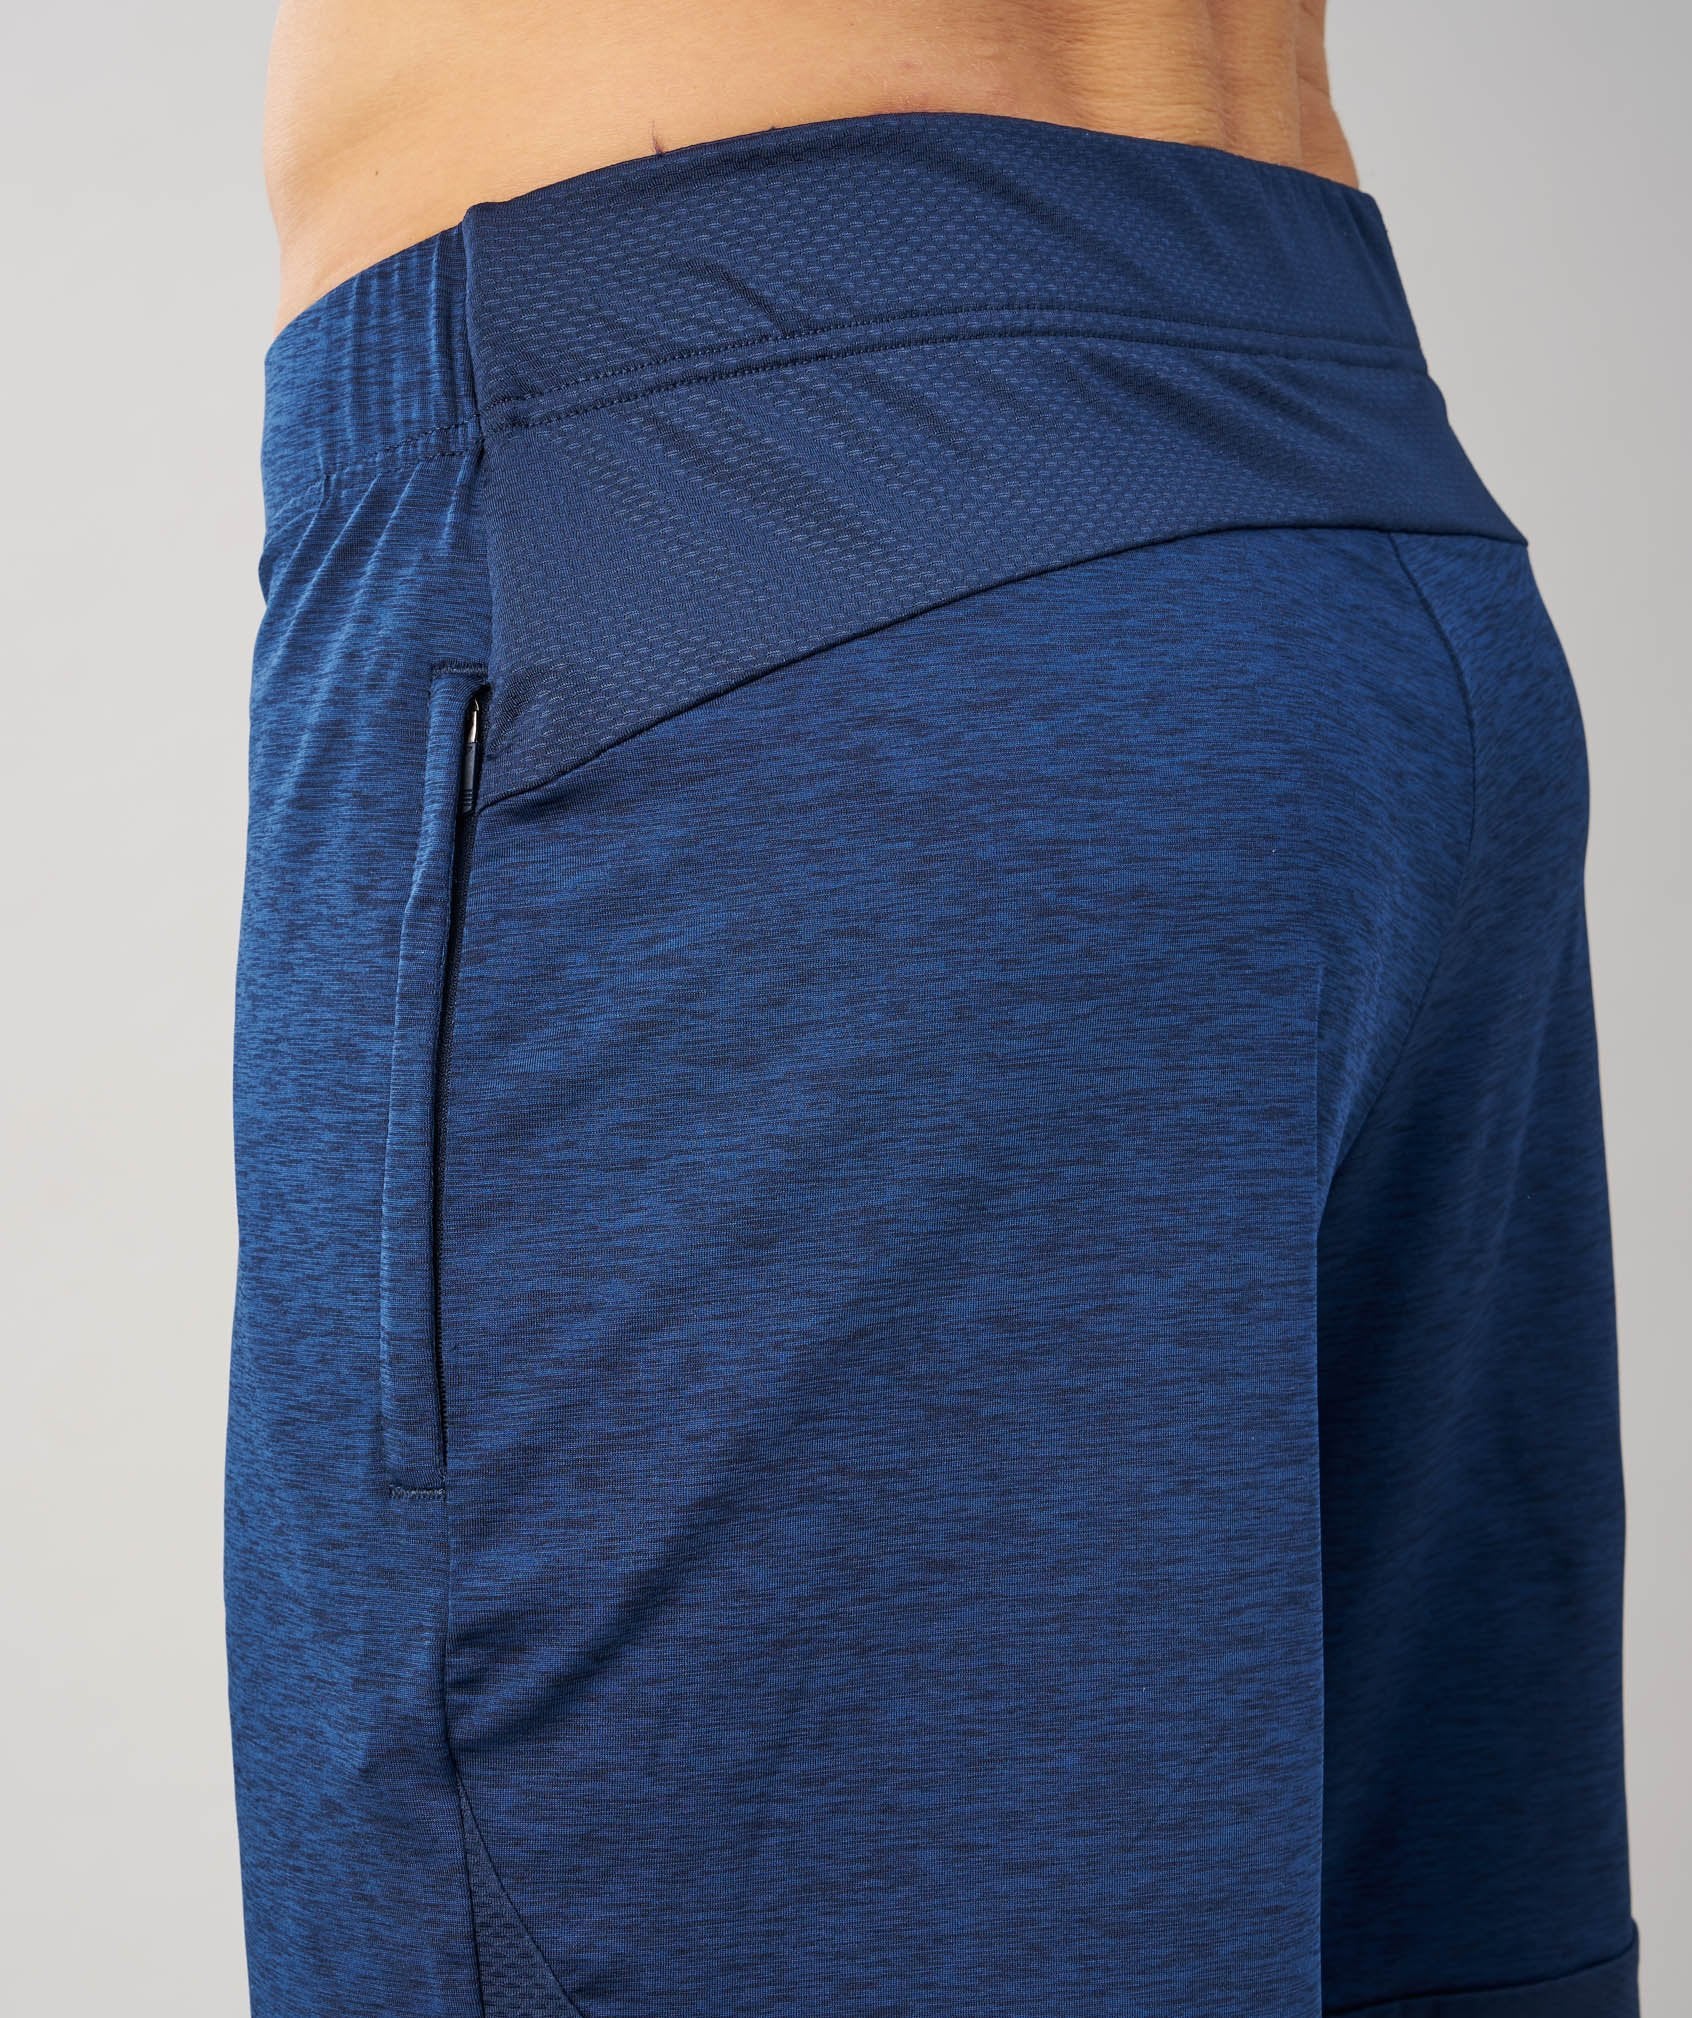 Fallout Shorts in Sapphire Blue Marl - view 6